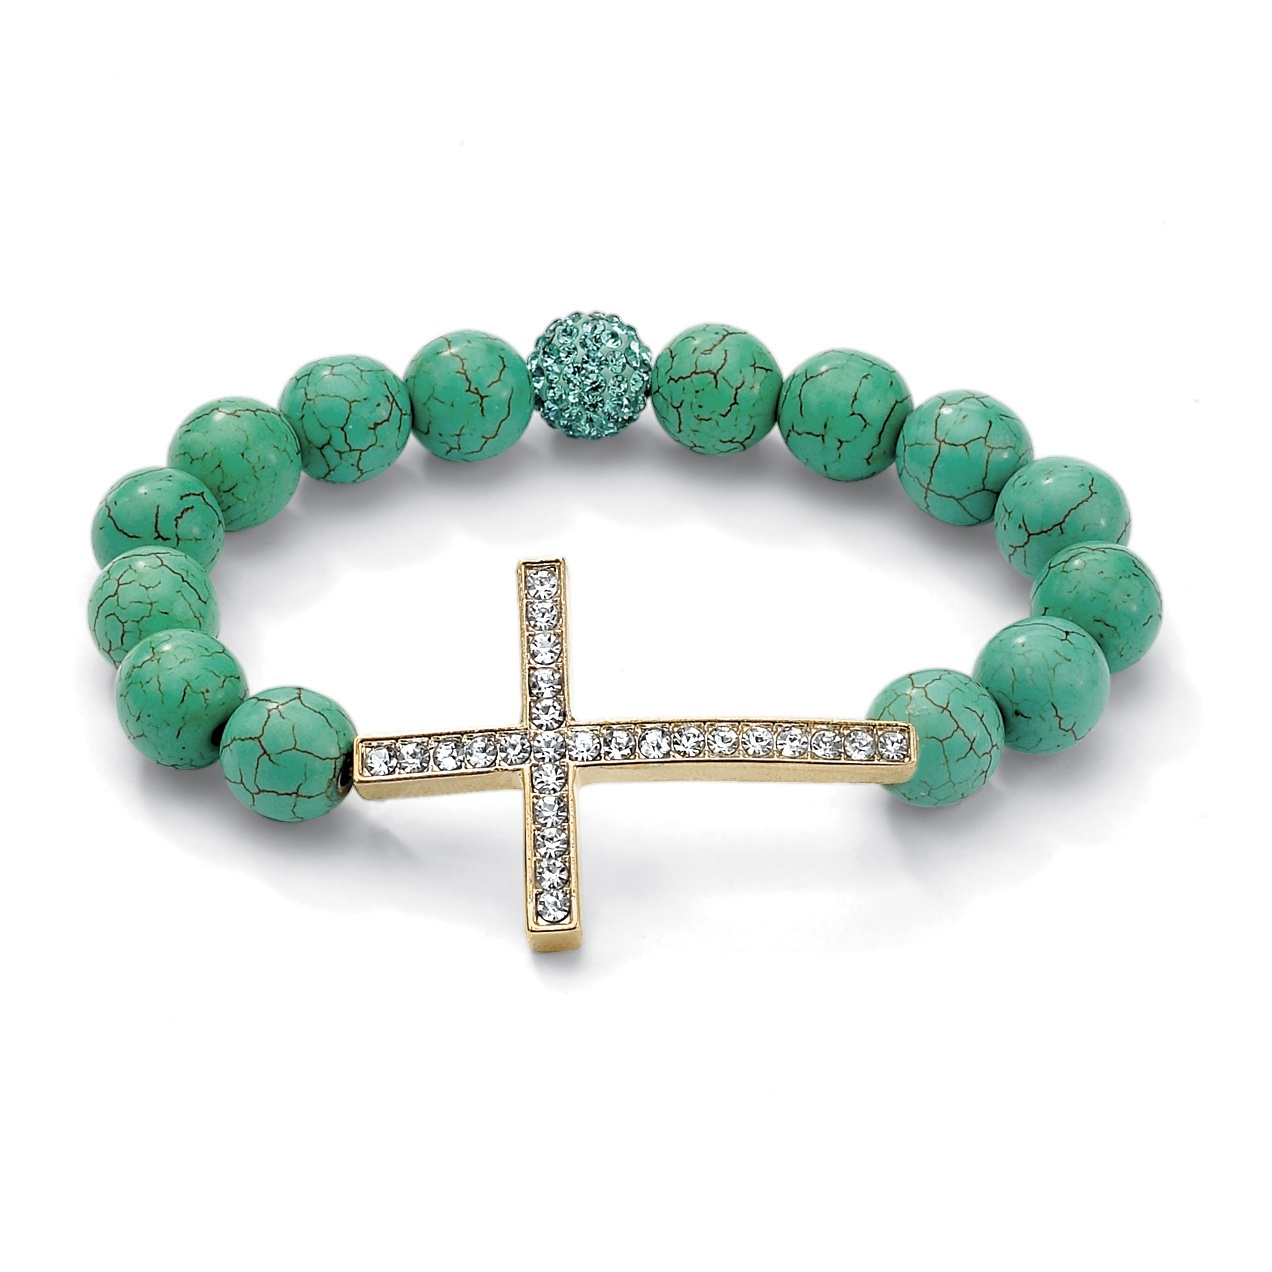 PalmBeach Jewelry Genuine Turquoise and Crystal Horizontal Cross Stretch Bracelet in Yellow Gold Tone 8"